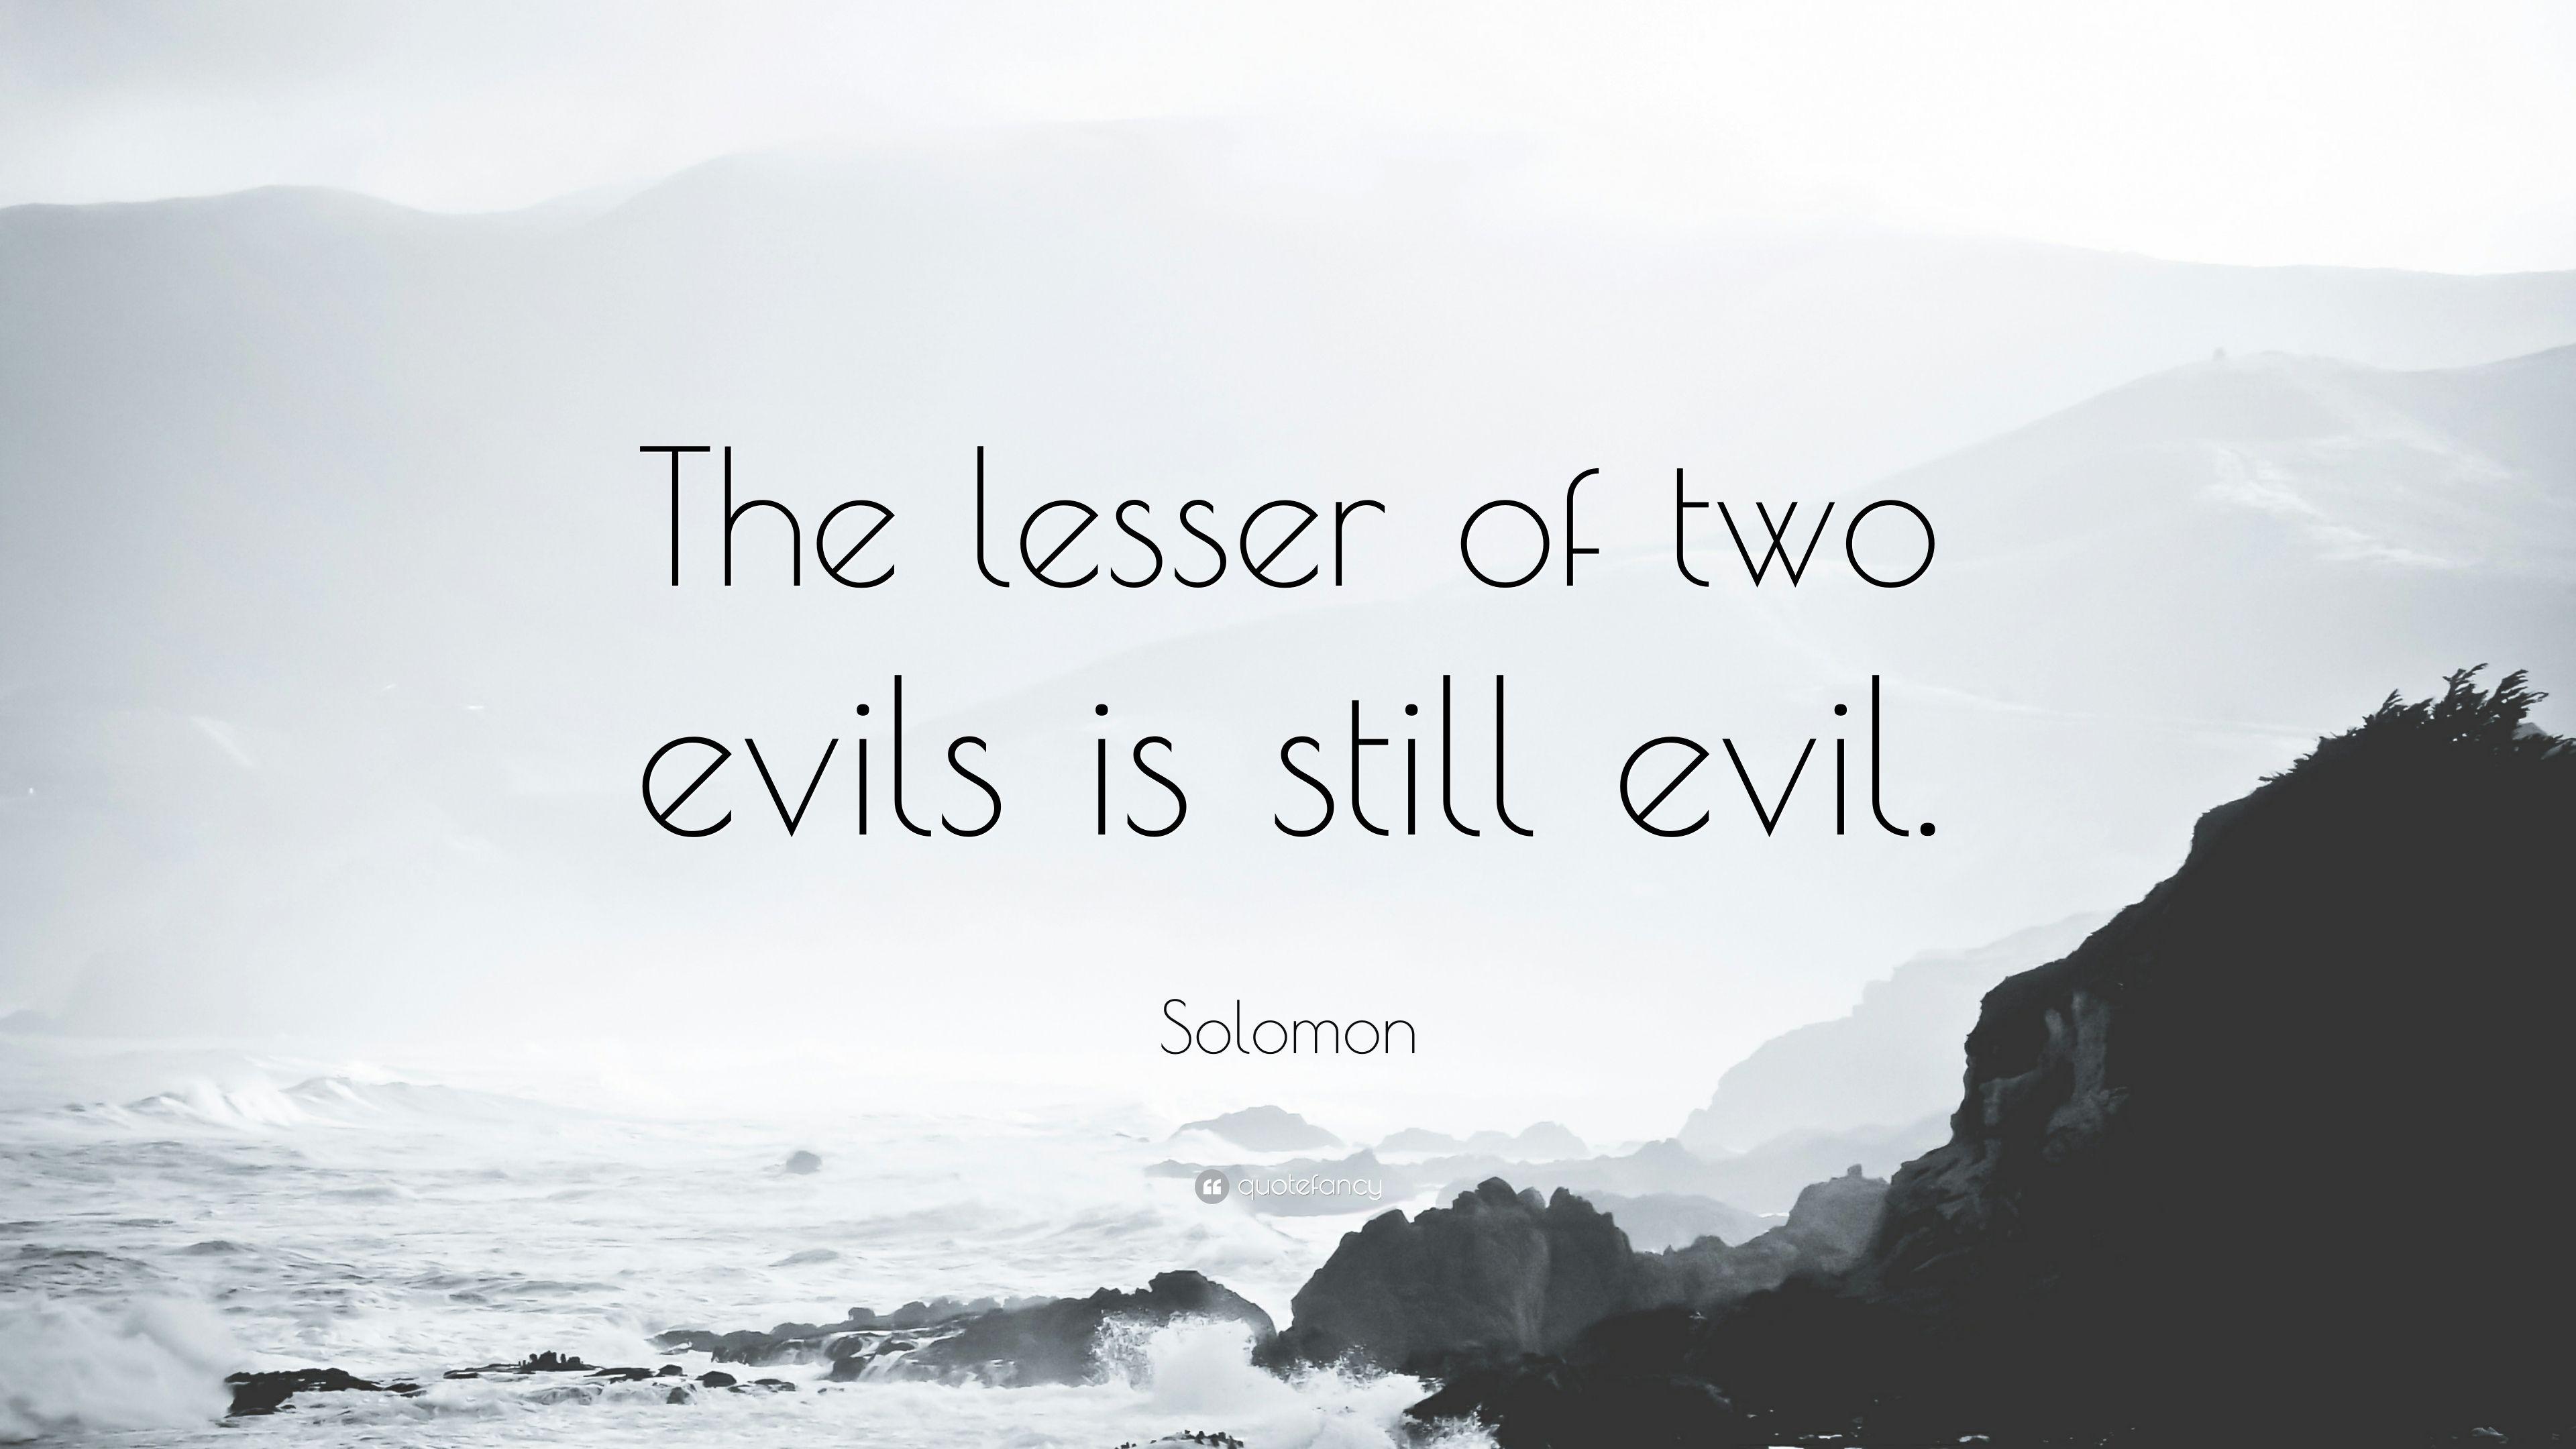 Solomon Quote: “The lesser of two evils is still evil.” 10